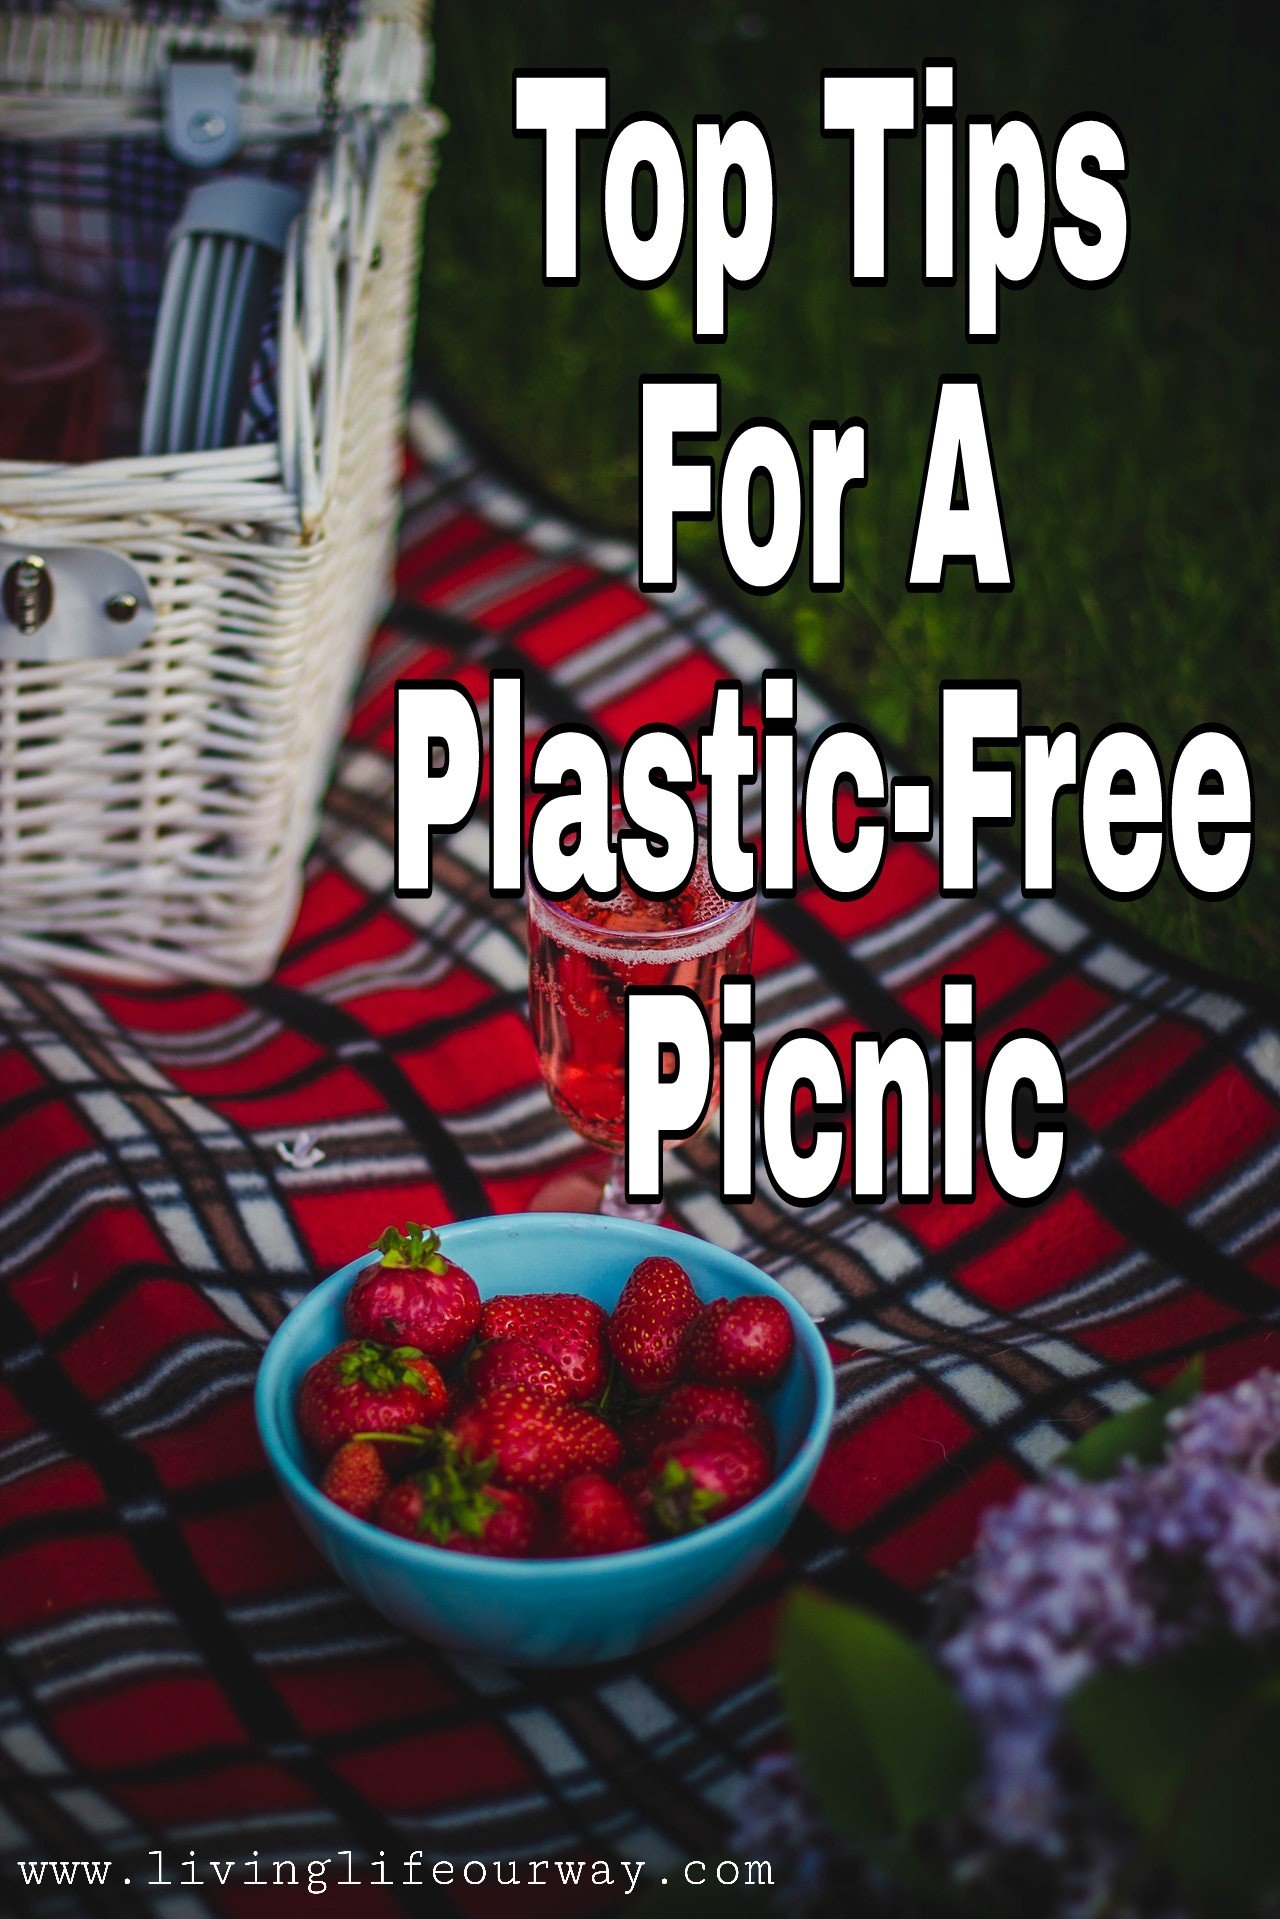 Top Tips For A Plastic-Free Picnic